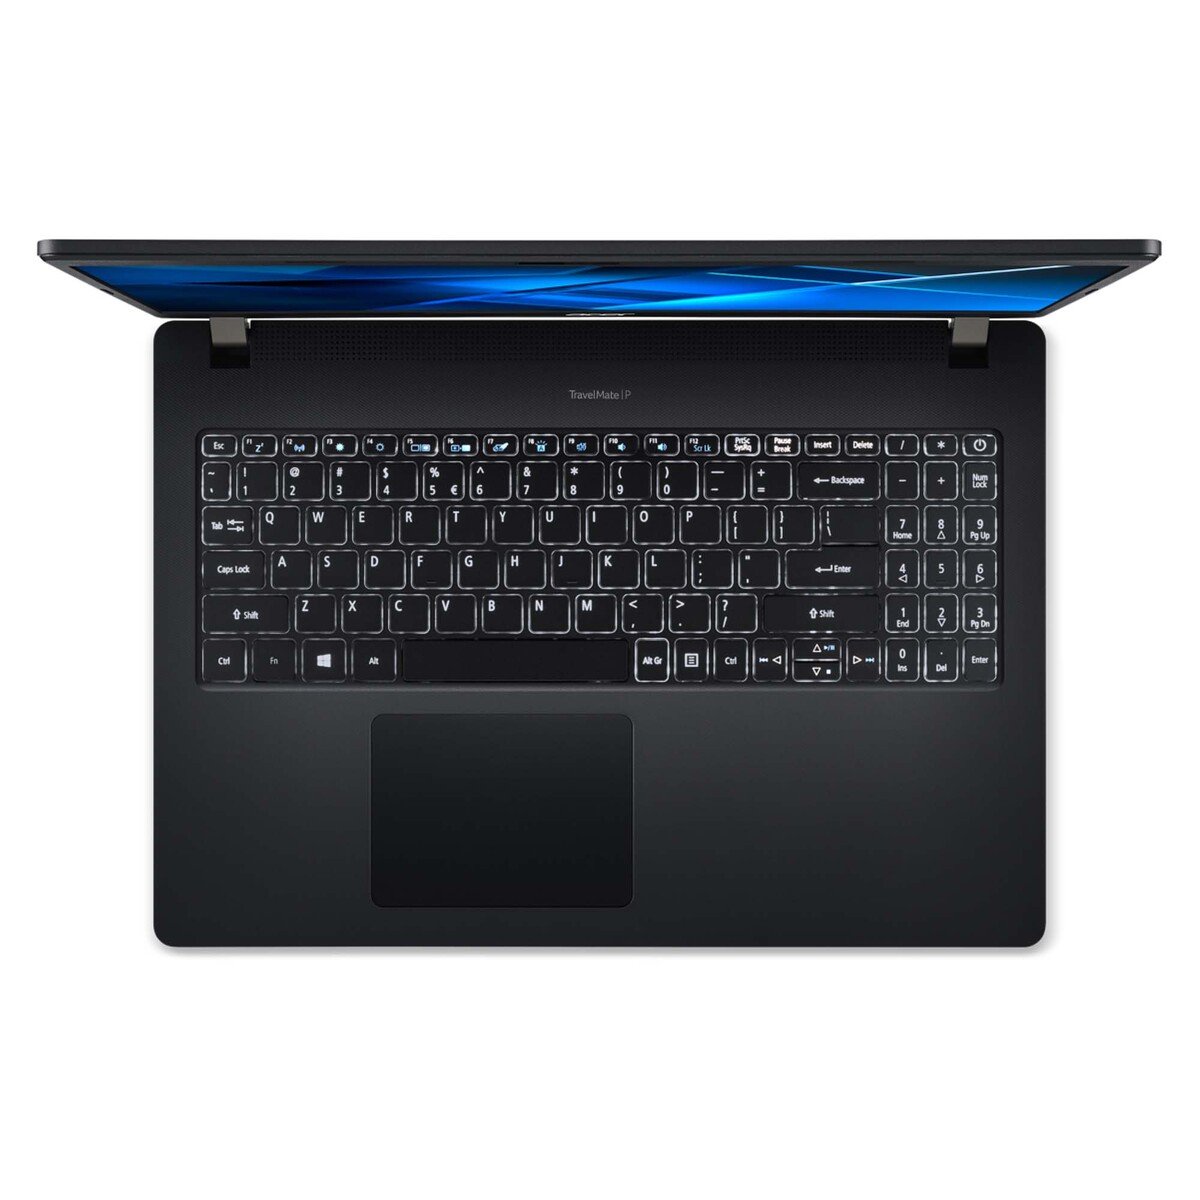 Acer TravelMate P2 Notebook, 15.6 Inches, Intel Core i7-1165G7, 8GB RAM, 512GB SSD, NVIDIA GeForce MX330 2GB Graphic Card, Black, TMP215-53G, DOS (No Operating System)